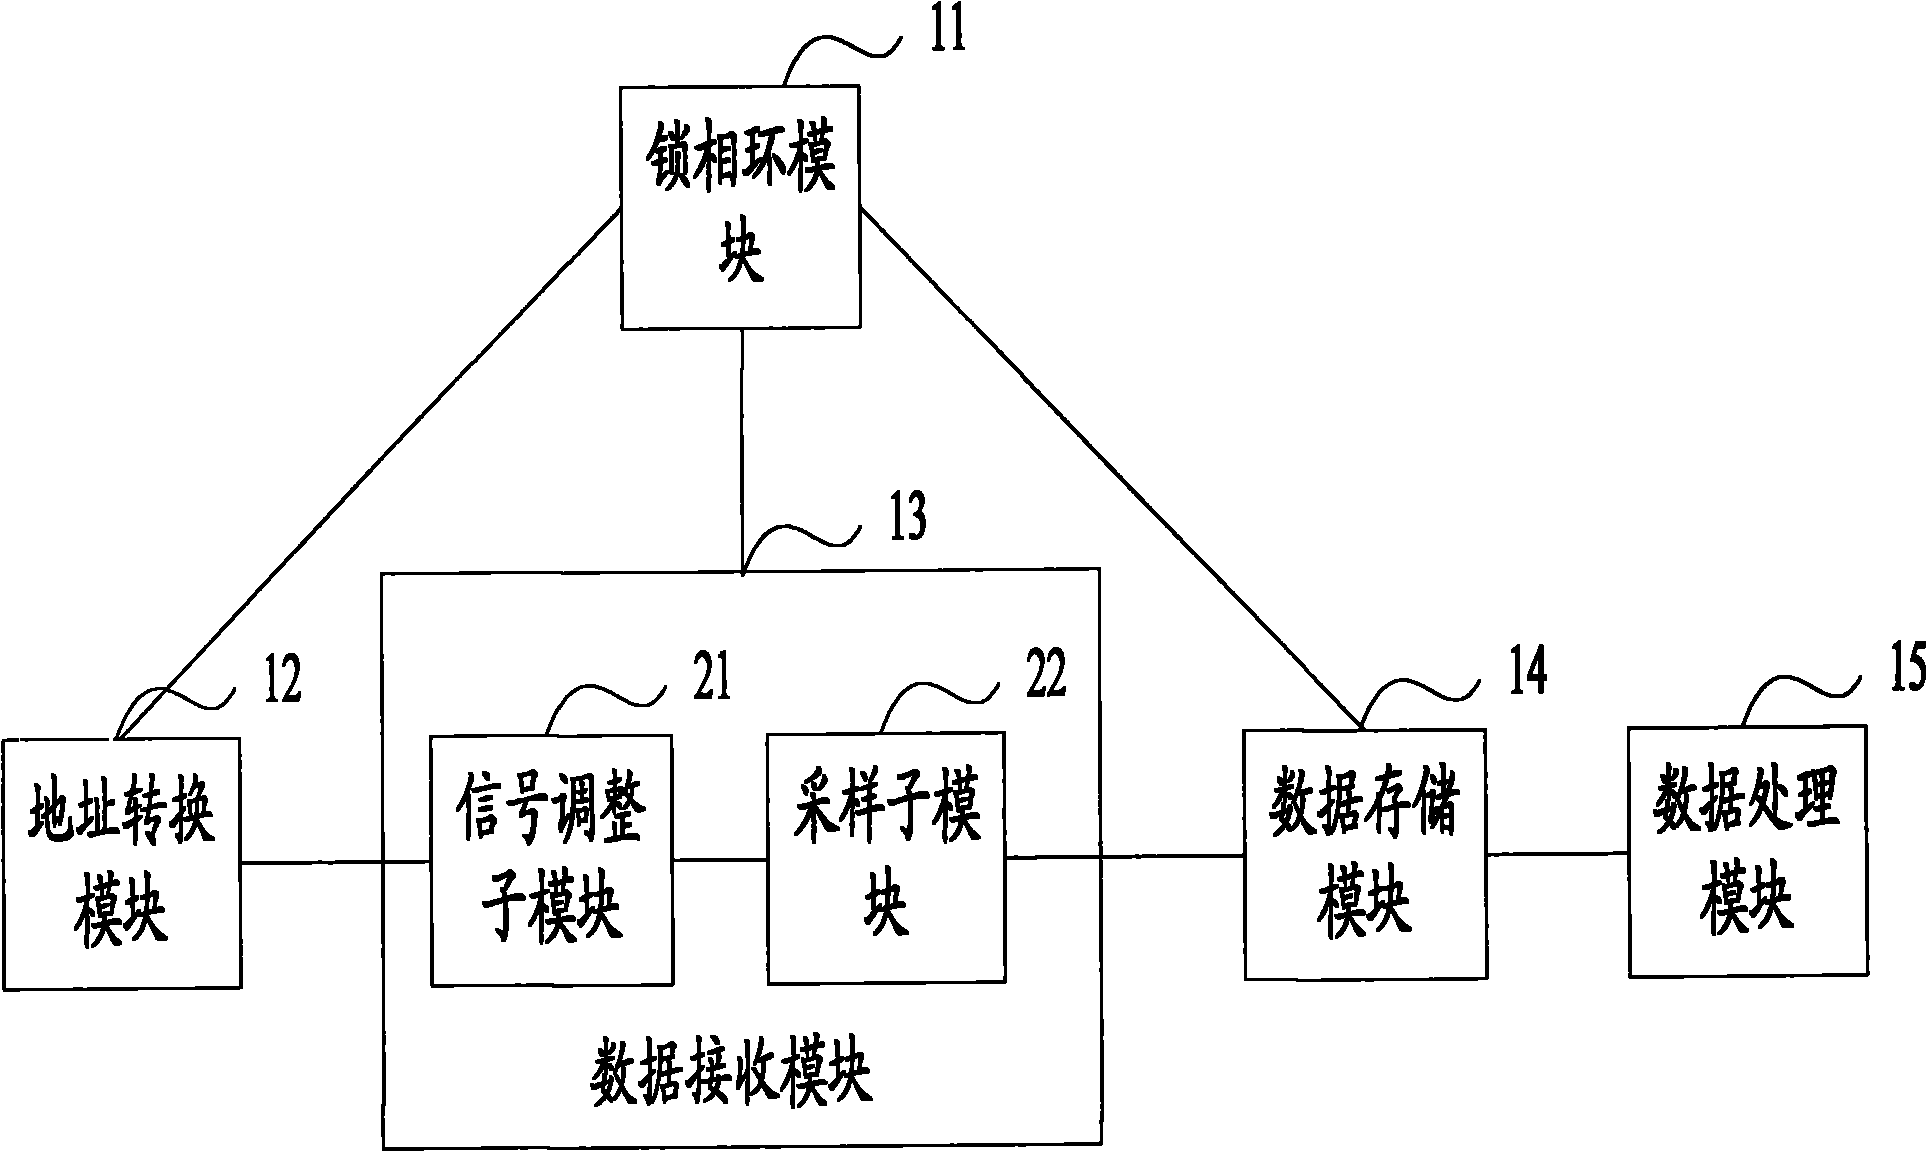 Reading and writing operation method and equipment of FPGA (Field Programmable Gate Array) equipment in DDR (Double Data Rate) interface